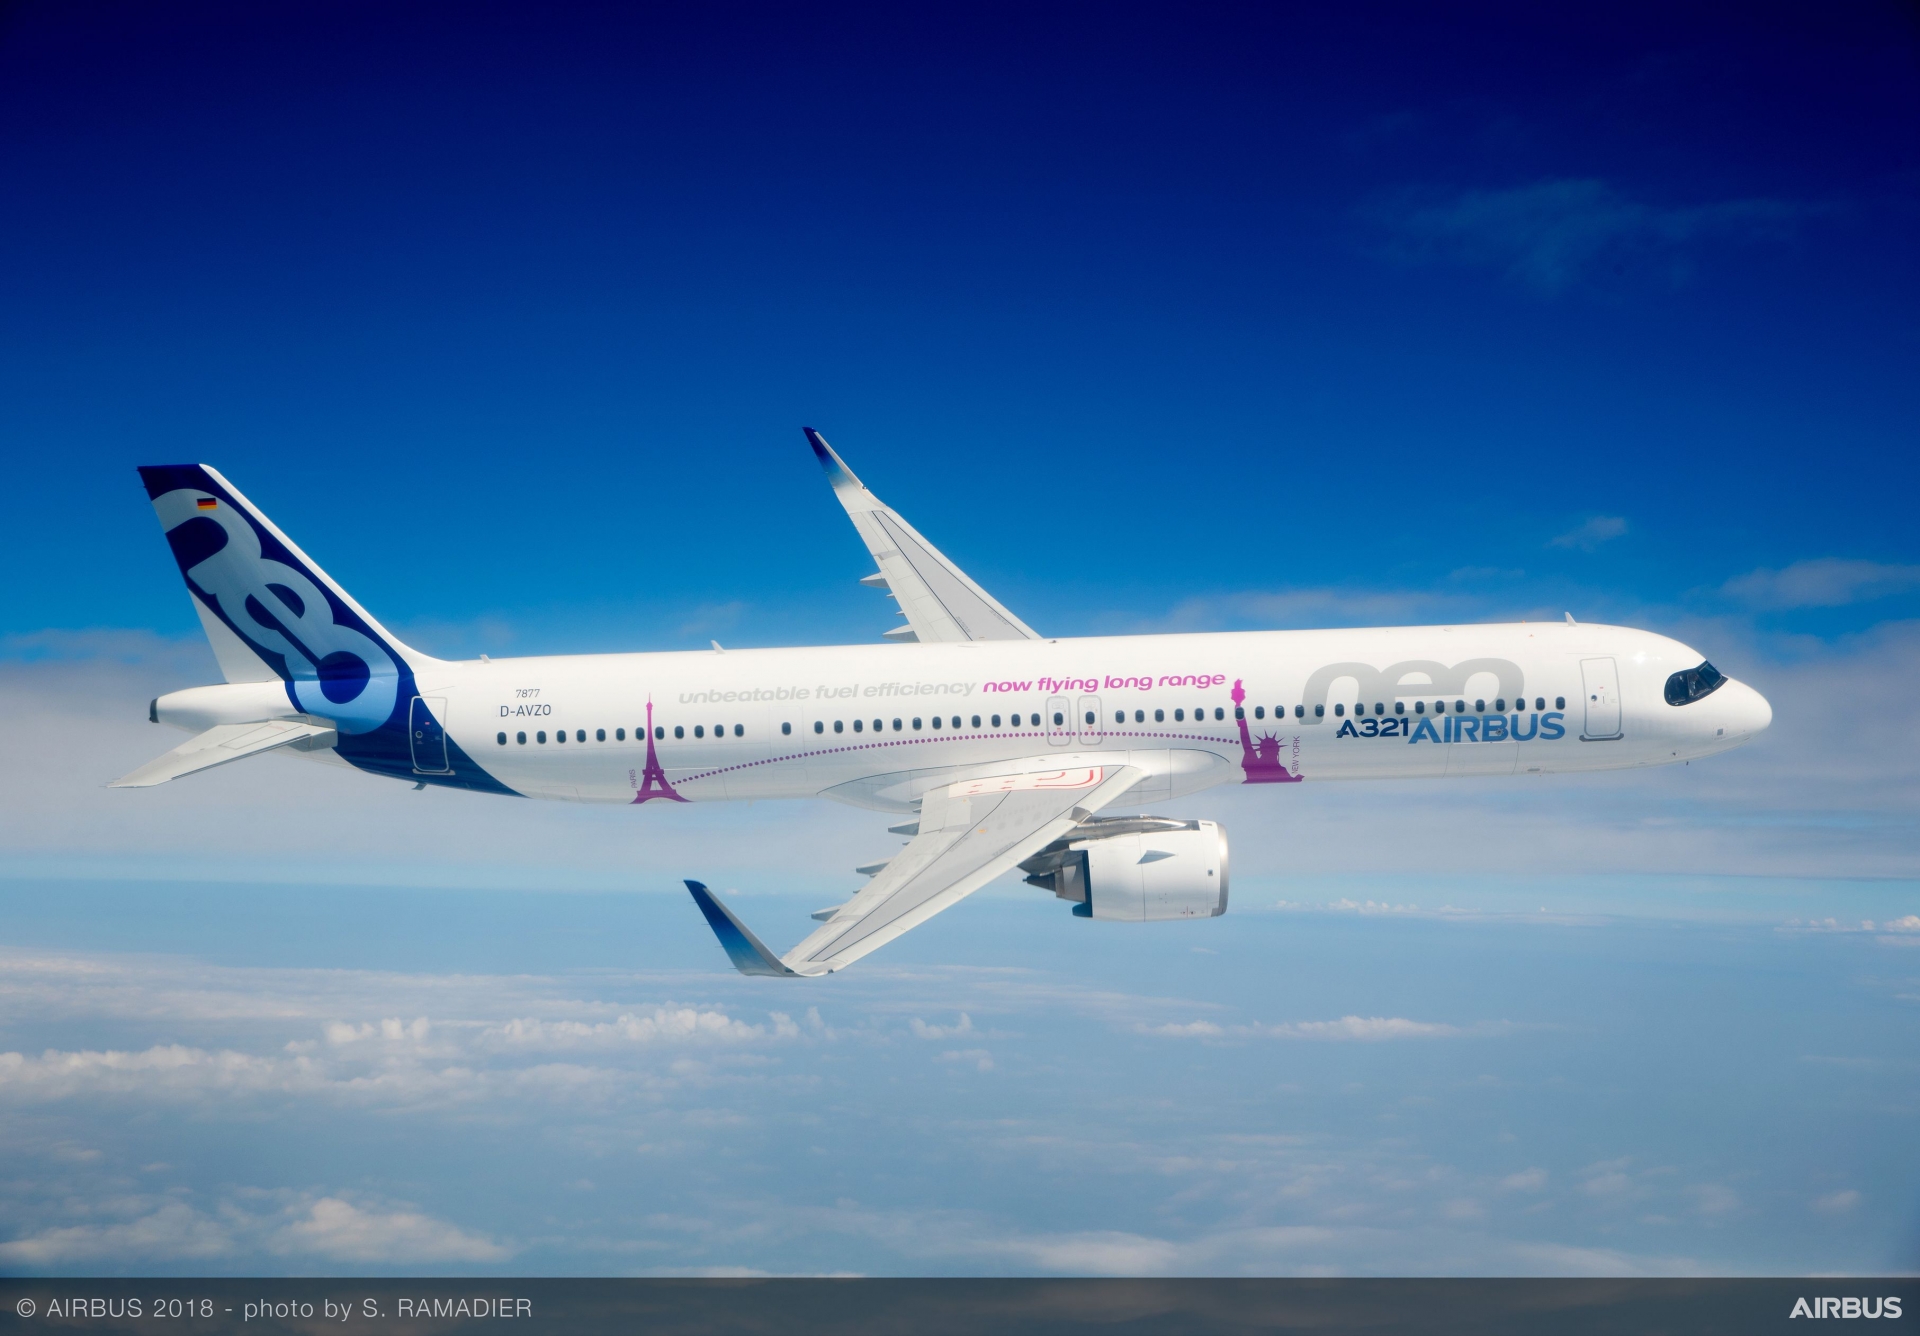 Airbus updates commercial programmes to prepare for recovery stage